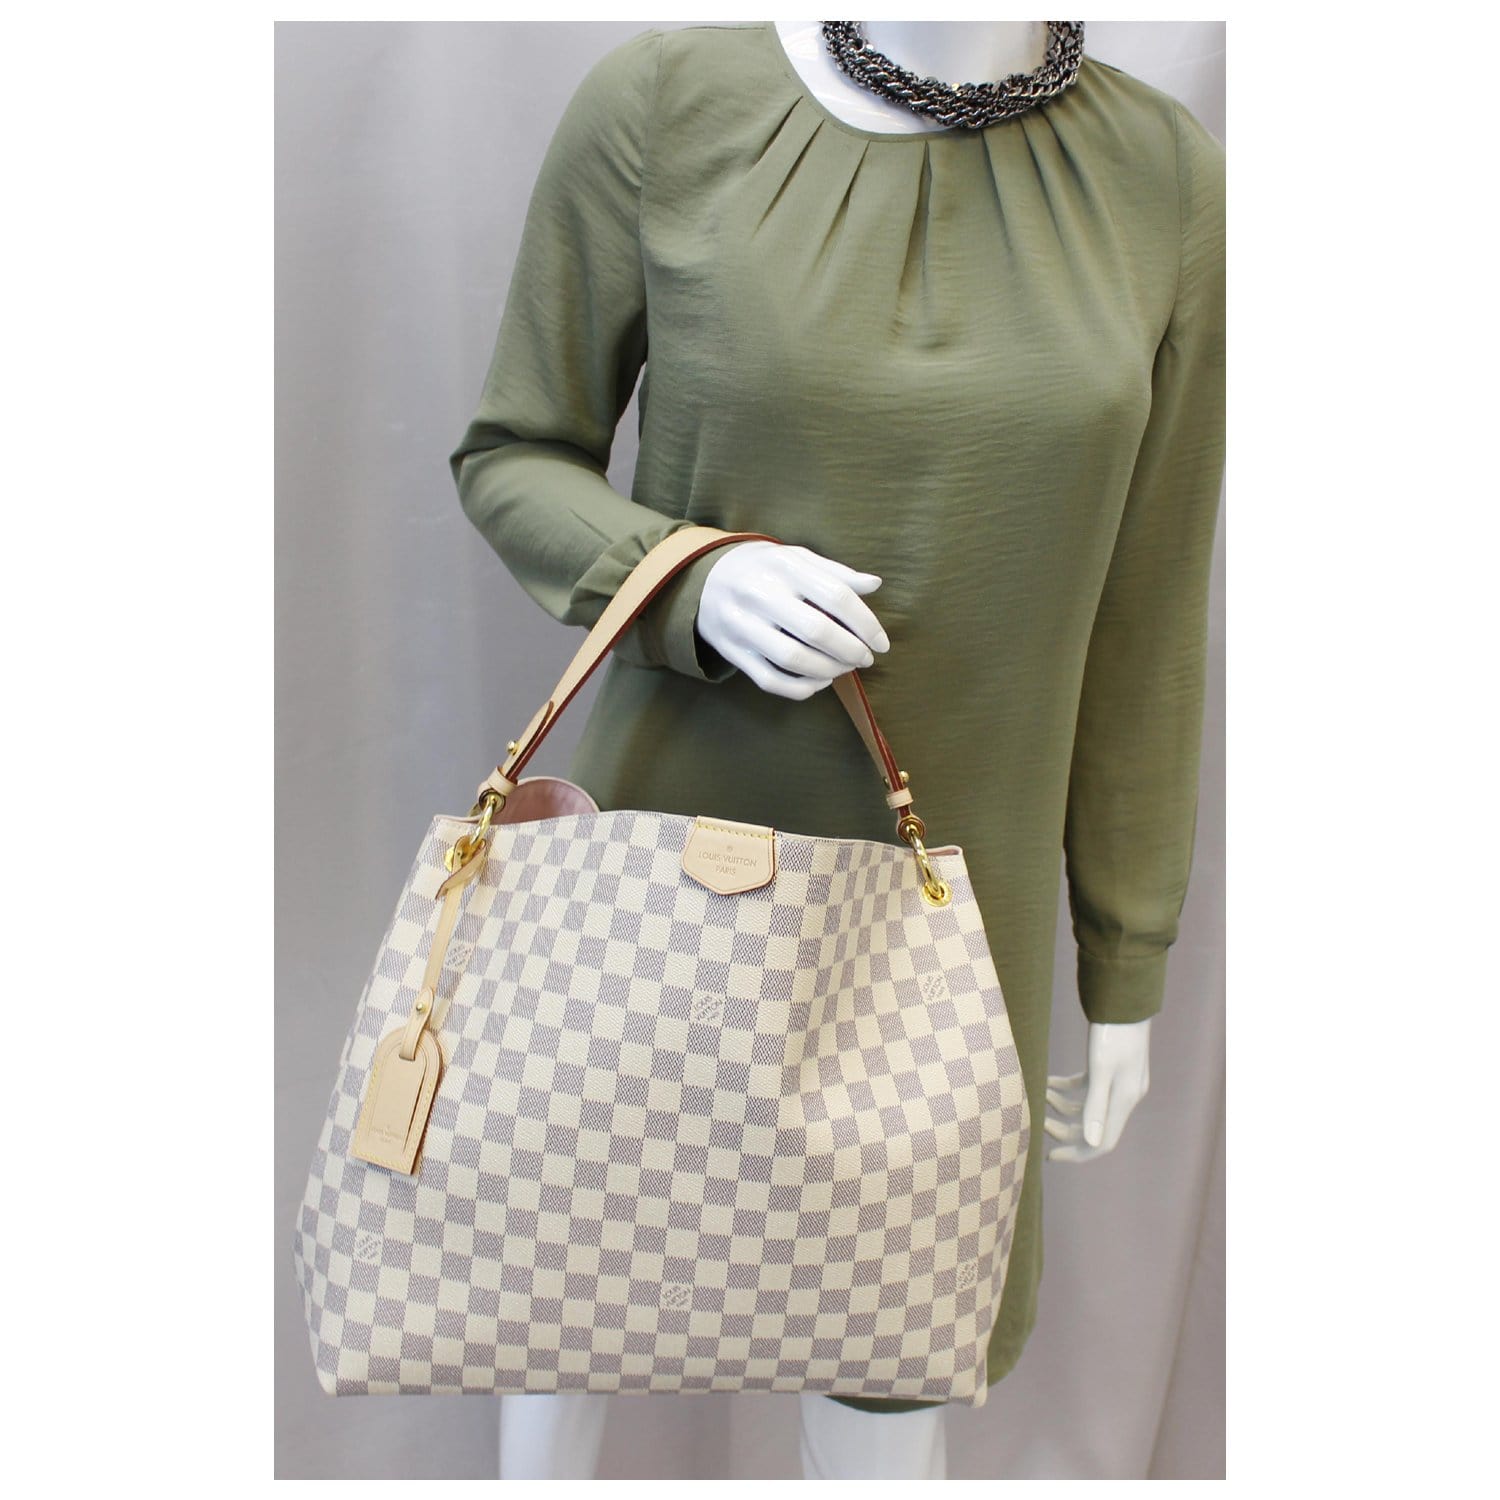 Products – Tagged louis vuitton graceful MM – AlgorithmBags